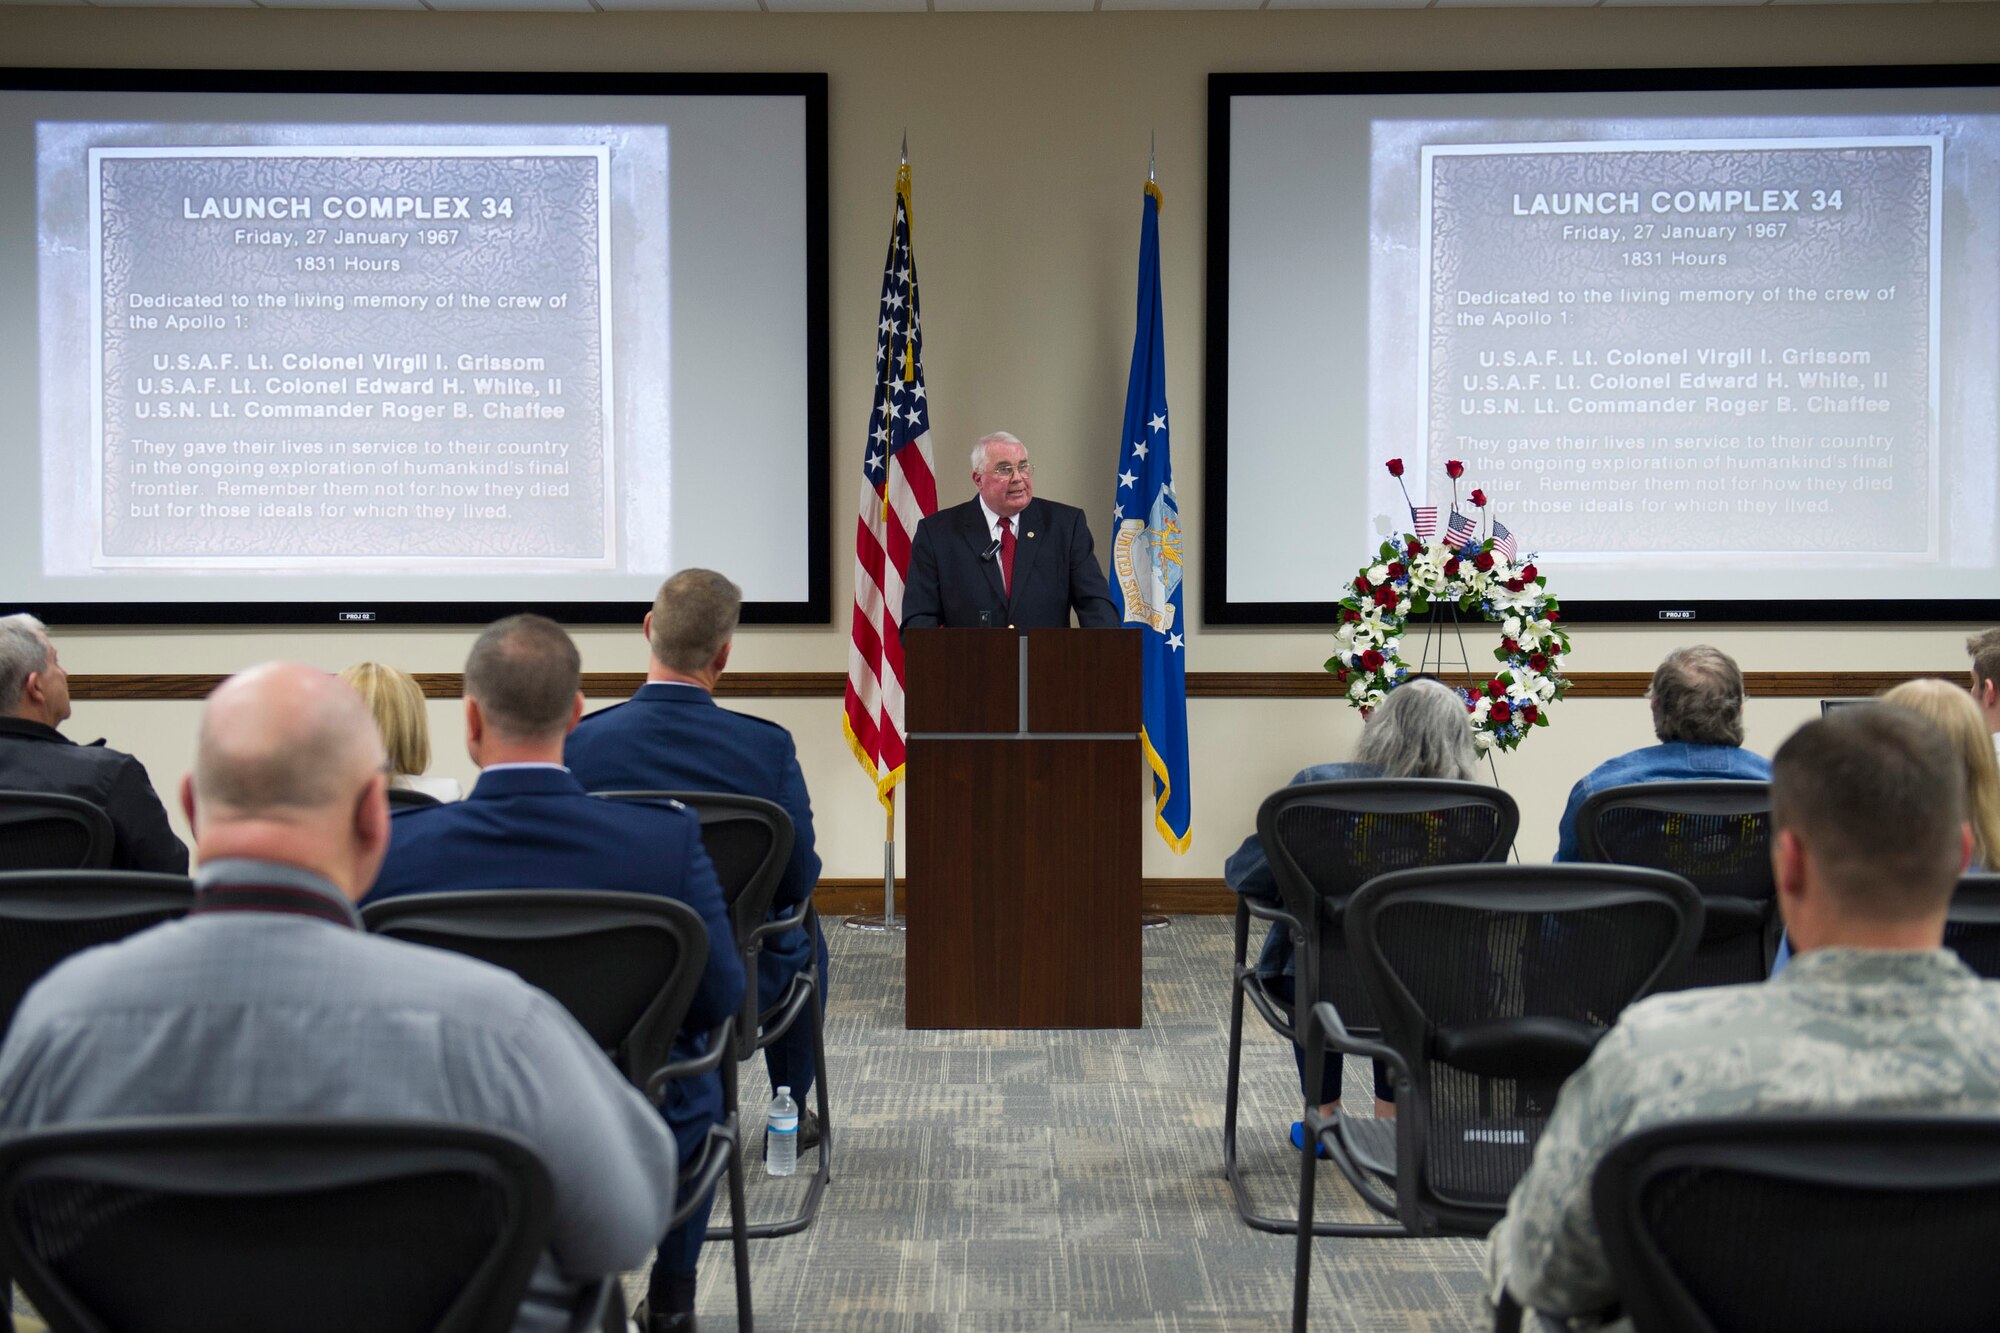 The 45th Space Wing hosted a memorial ceremony honoring the 49th anniversary of the Apollo 1 tragedy Jan. 27, at Cape Canaveral Air Force Station, Fla. The memorial honored crew members, Lt. Col. Virgil I. Gus Grissom, command pilot, Lt. Col. Edward H. White II, senior pilot, and Lt. Commander, Roger B. Chaffee, pilot, who were killed by a flash fire during a launch pad test of their Saturn 1B rocket, Jan. 27, 1967. The memorial ceremony is traditionally held at Space Launch Complex 34, where the accident occurred, but was held indoors due to inclement weather. (U.S. Air Force photo/Matthew Jurgens) (Released) 